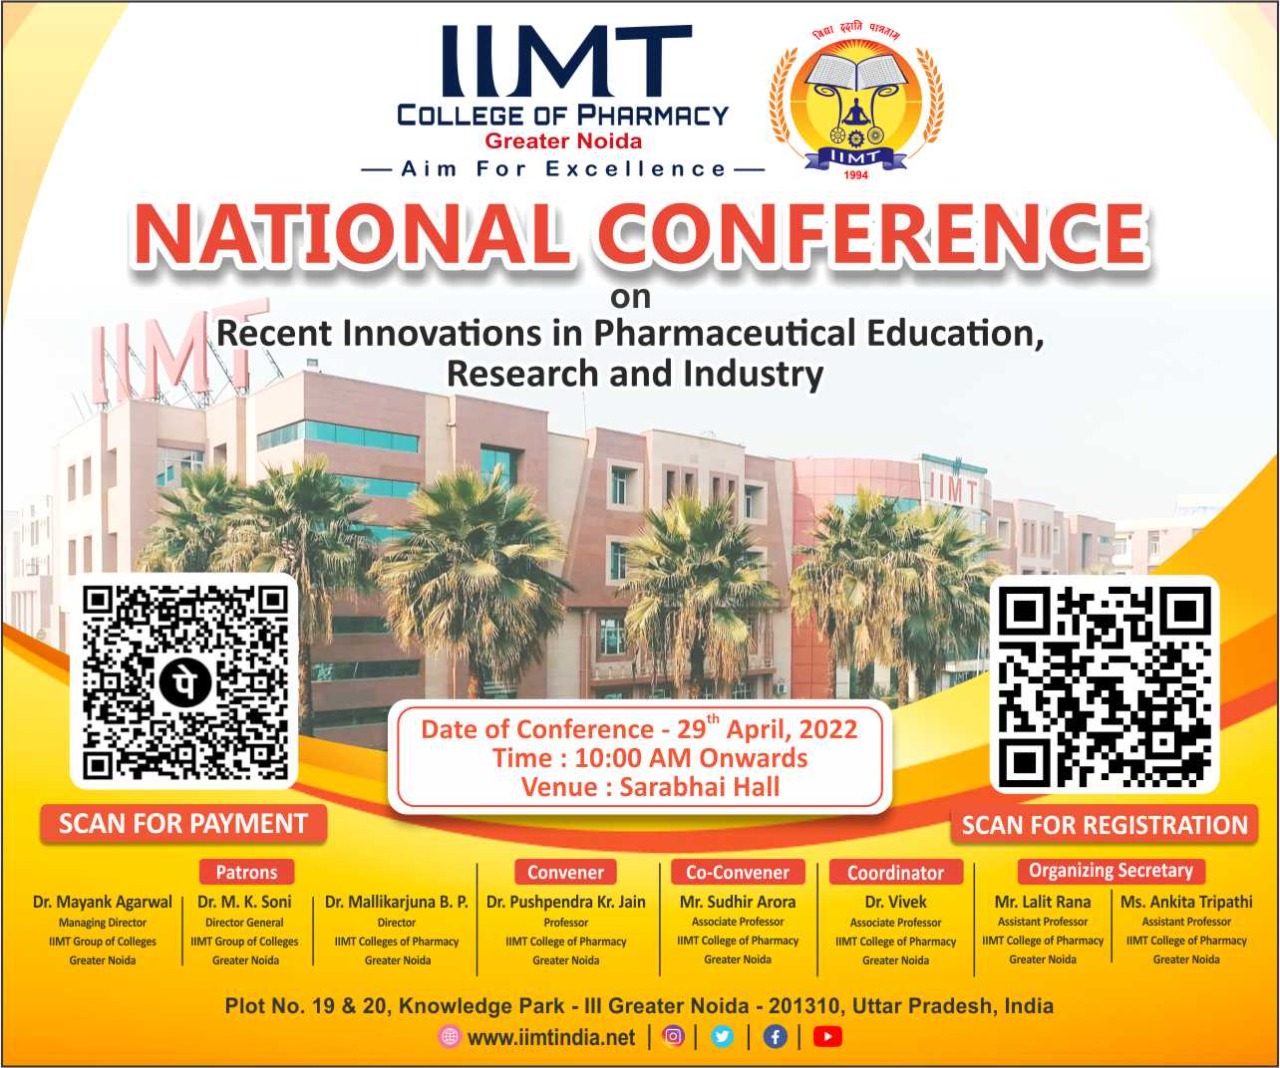 National Conference on Recent Innovations in Pharmaceutical Education, Research and Industry.